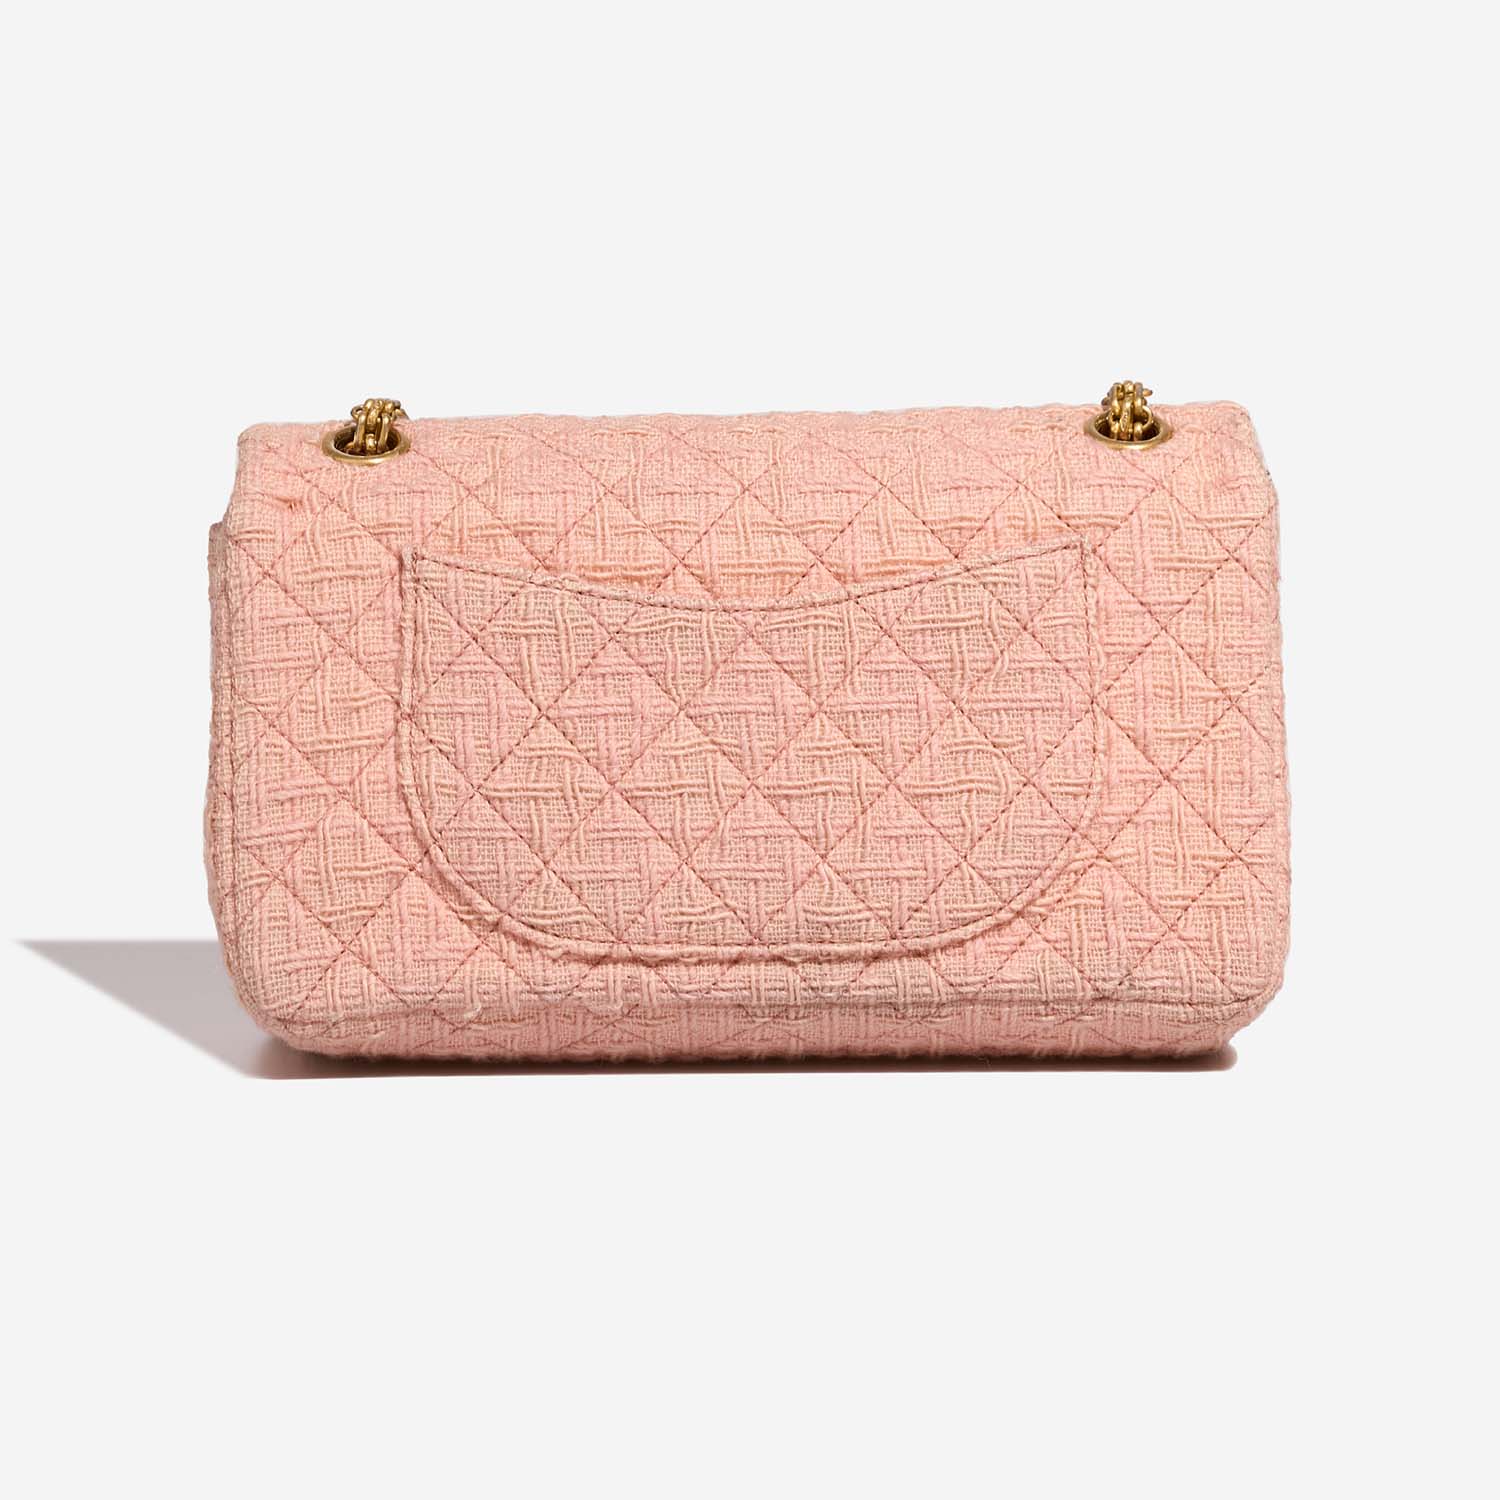 authentic chanel pink bag